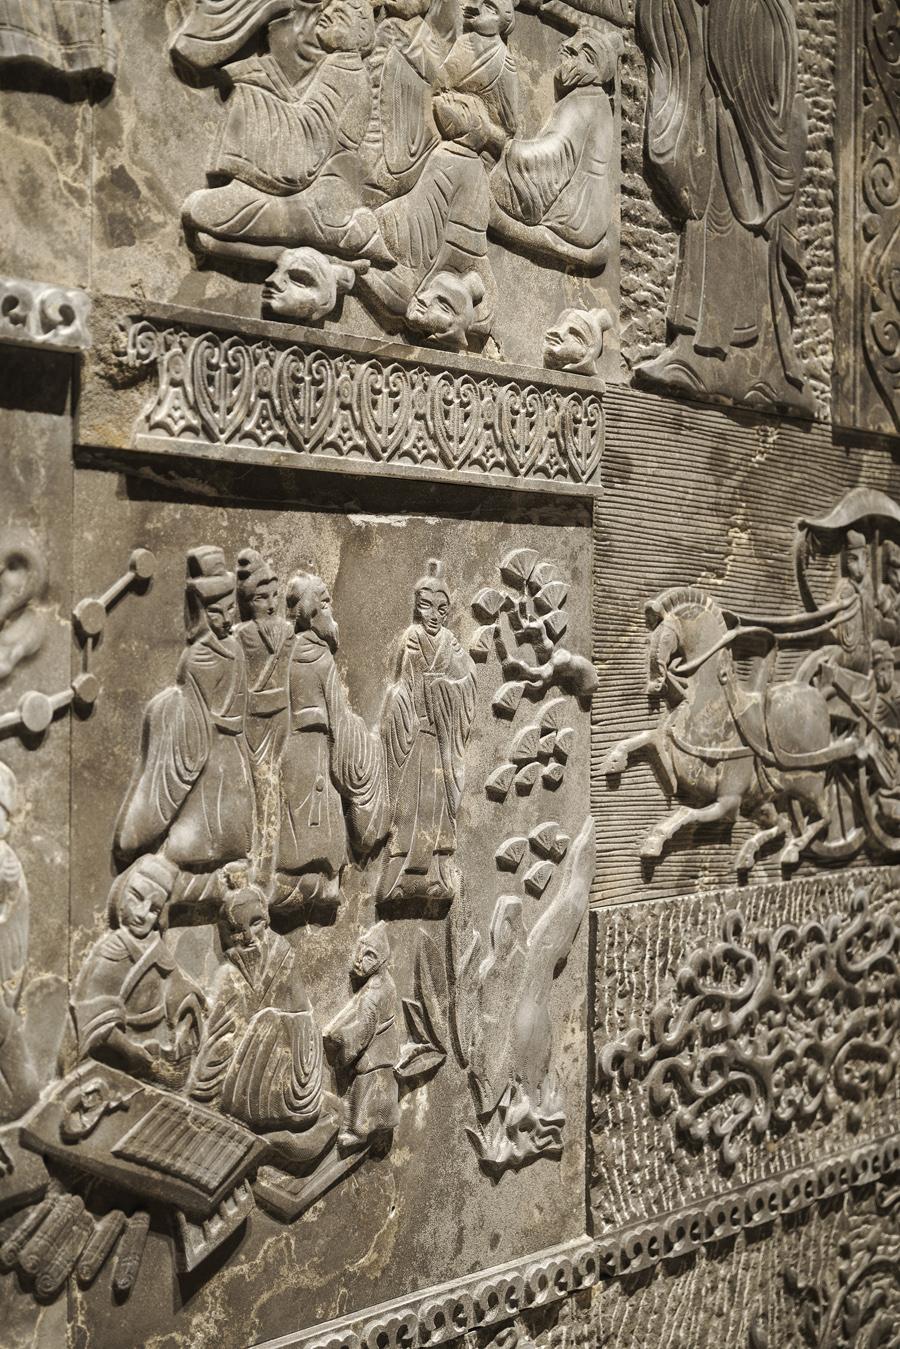 A meticulously crafted wall boasts scenes of old-world China